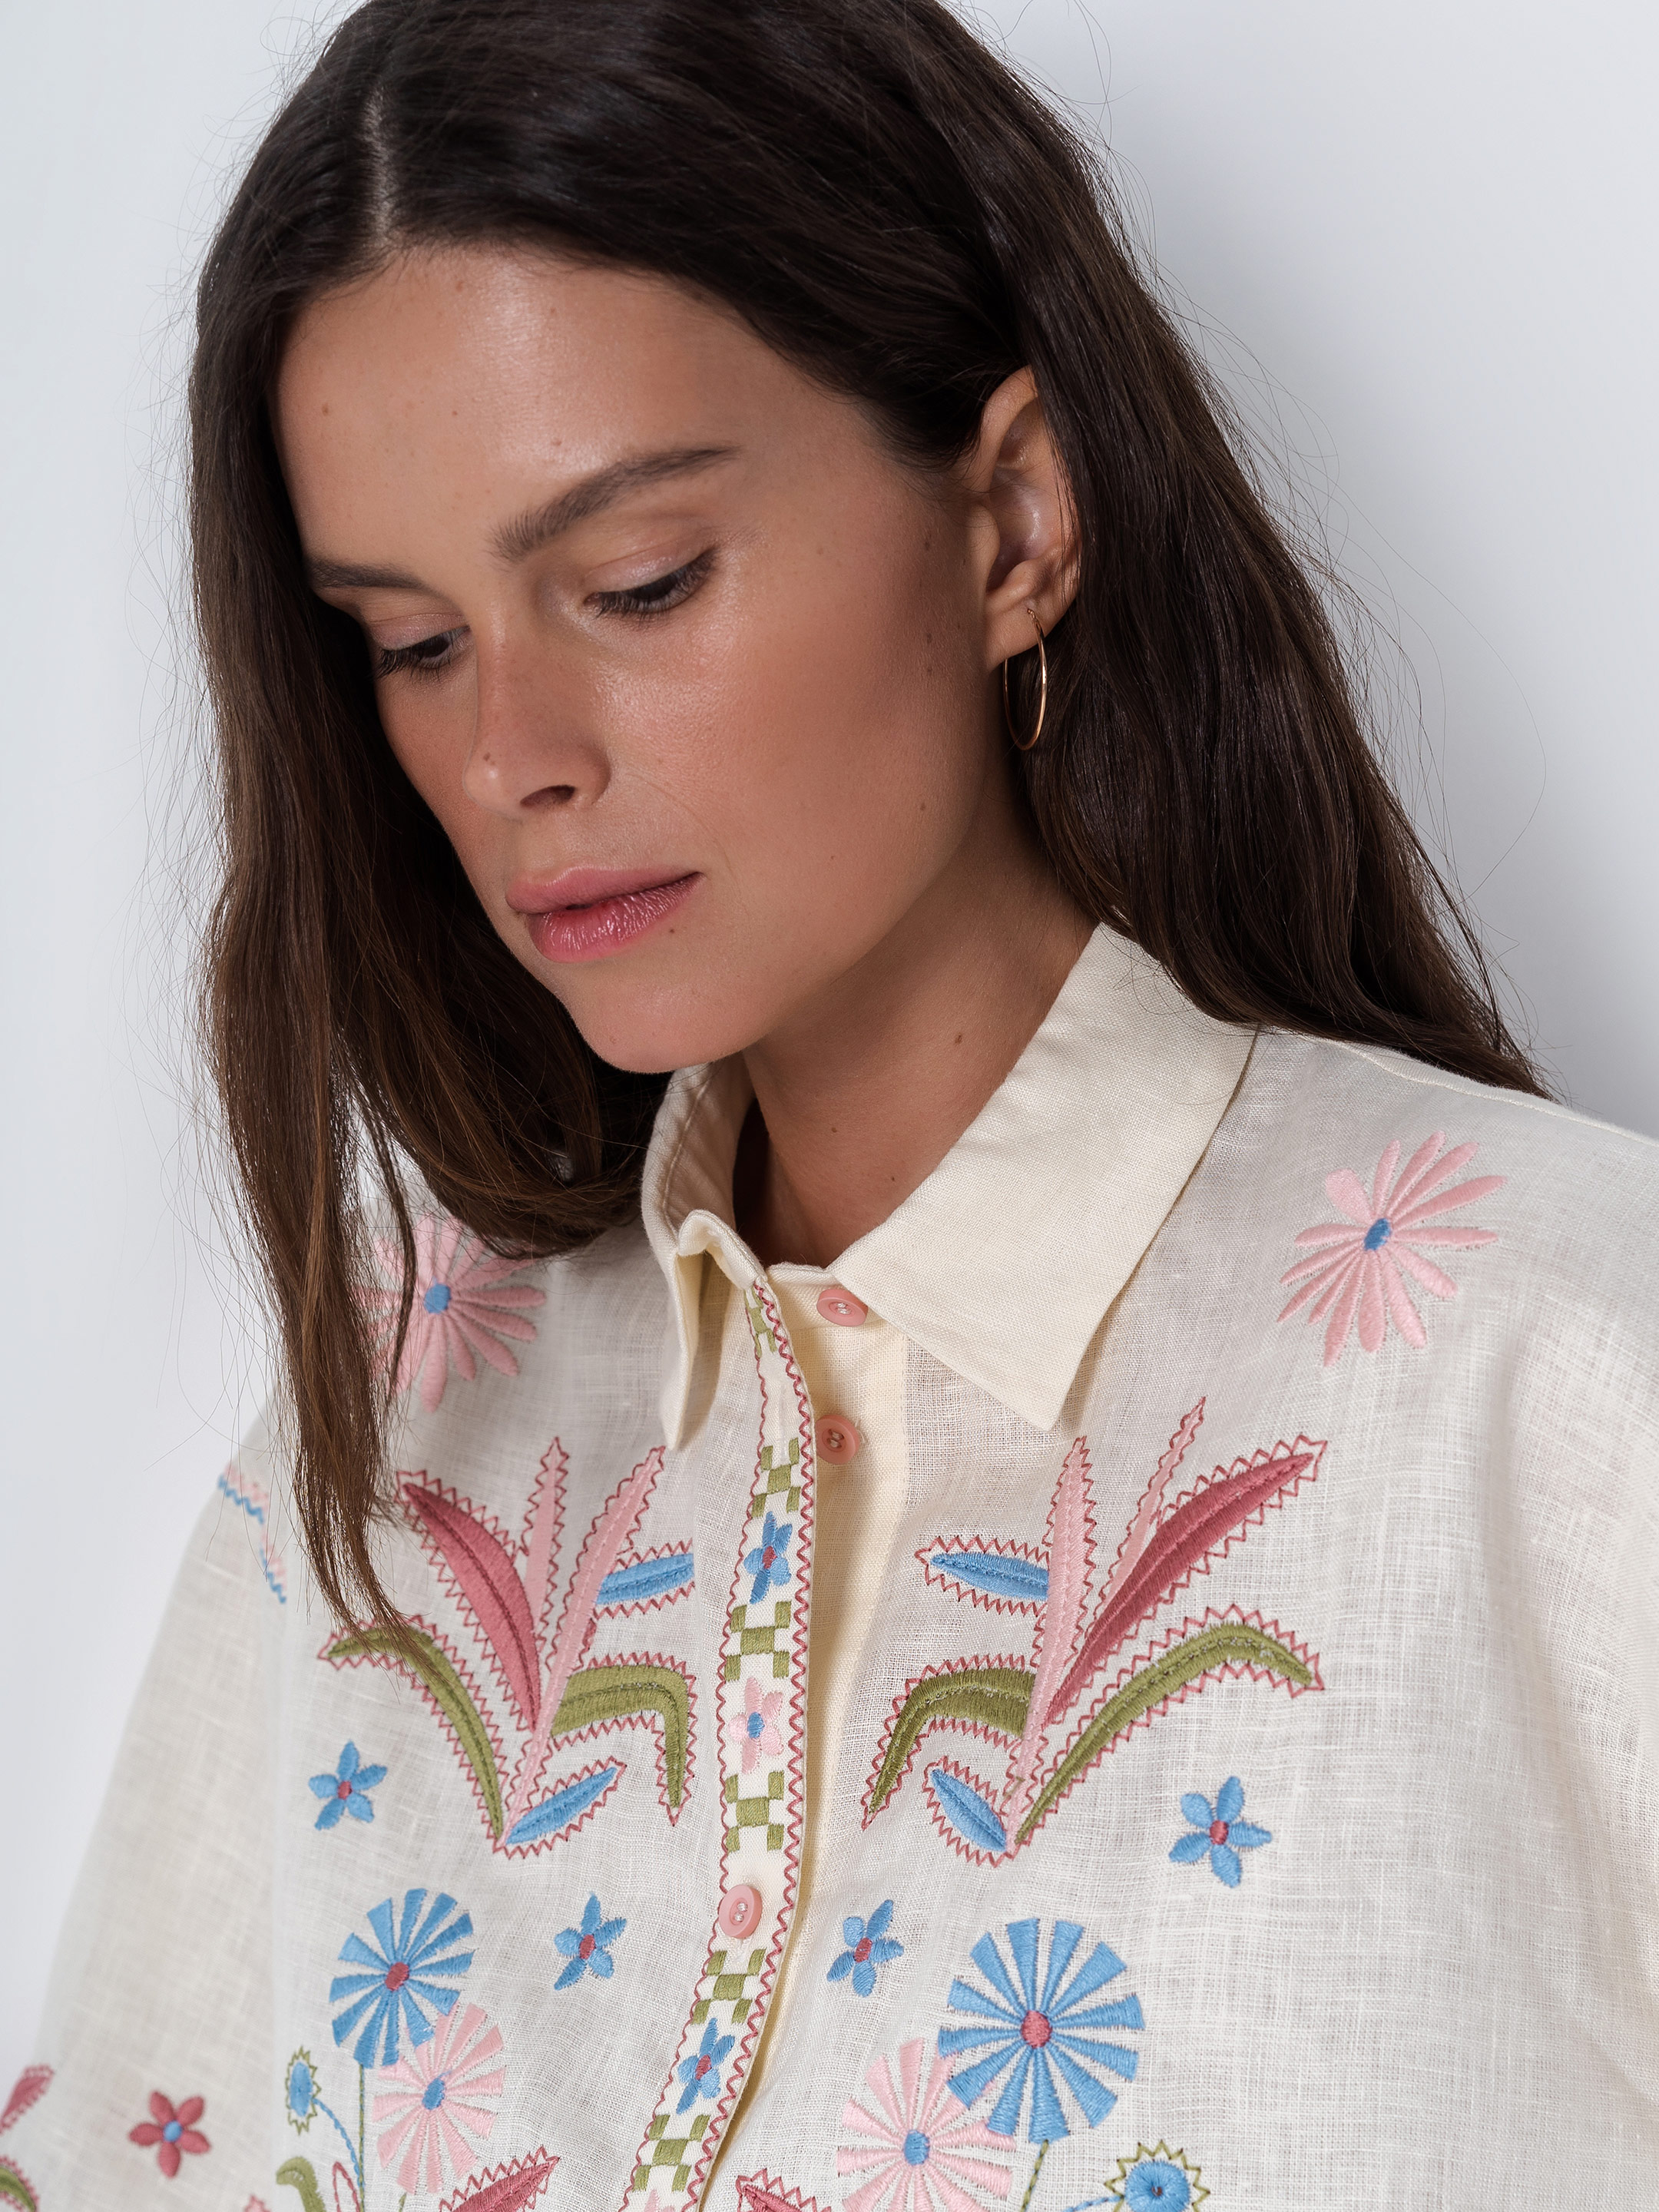 Linen shirt with floral embroidery Veselka - photo 2